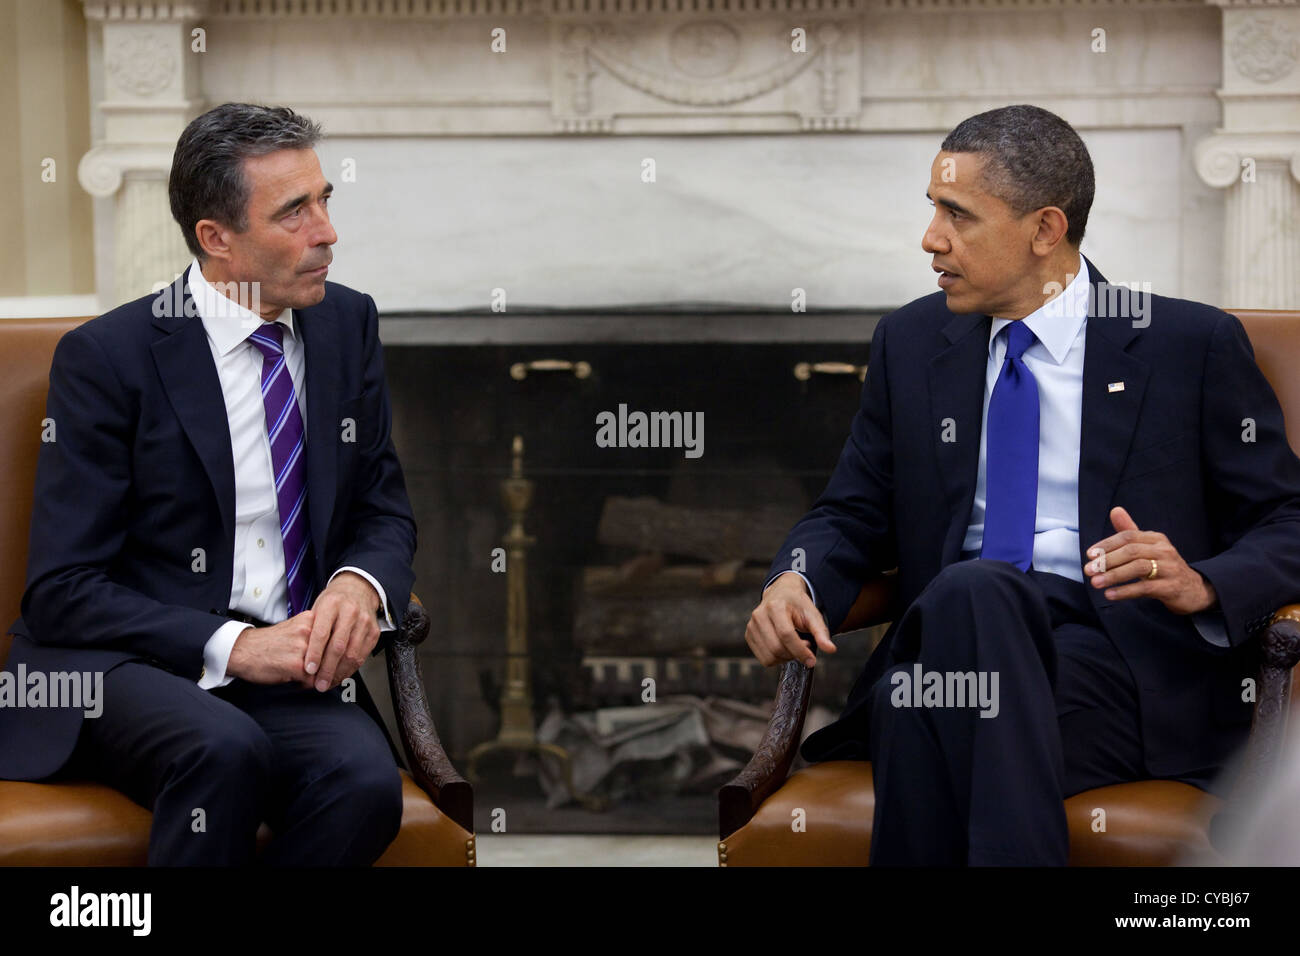 US President Barack Obama meets with NATO Secretary General Anders Fogh Rasmussen May 13, 2011 in the Oval Office of the White House. Stock Photo